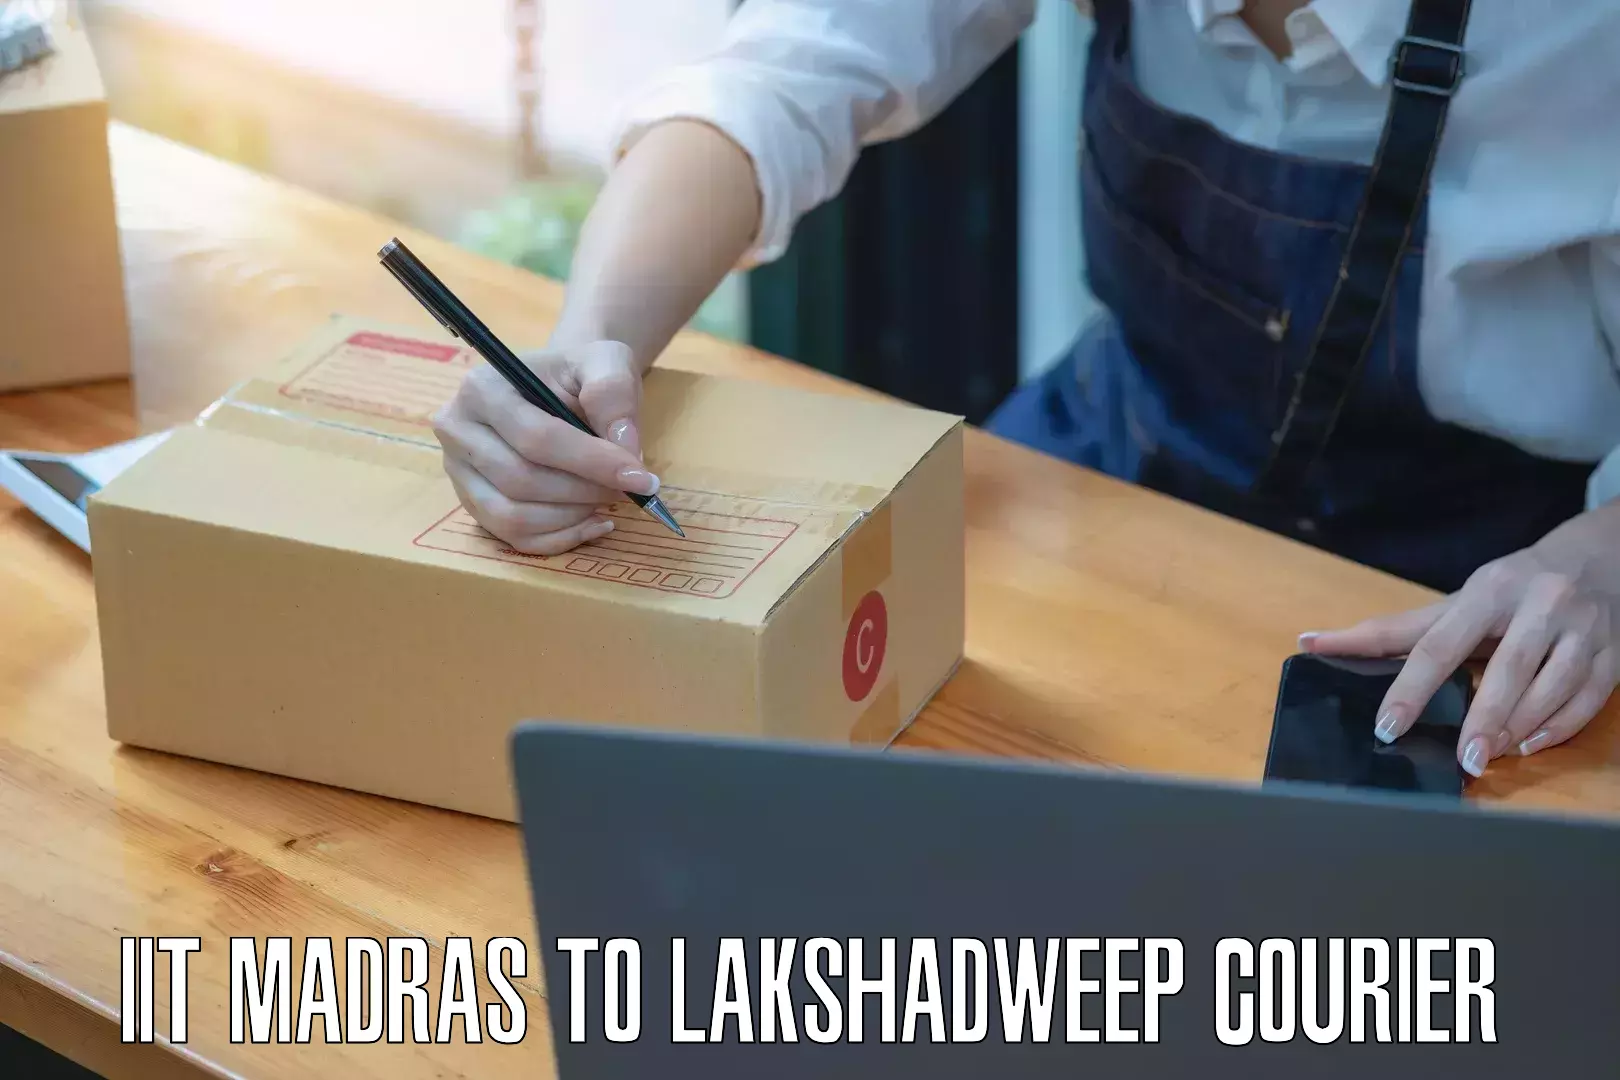 Personalized courier experiences IIT Madras to Lakshadweep